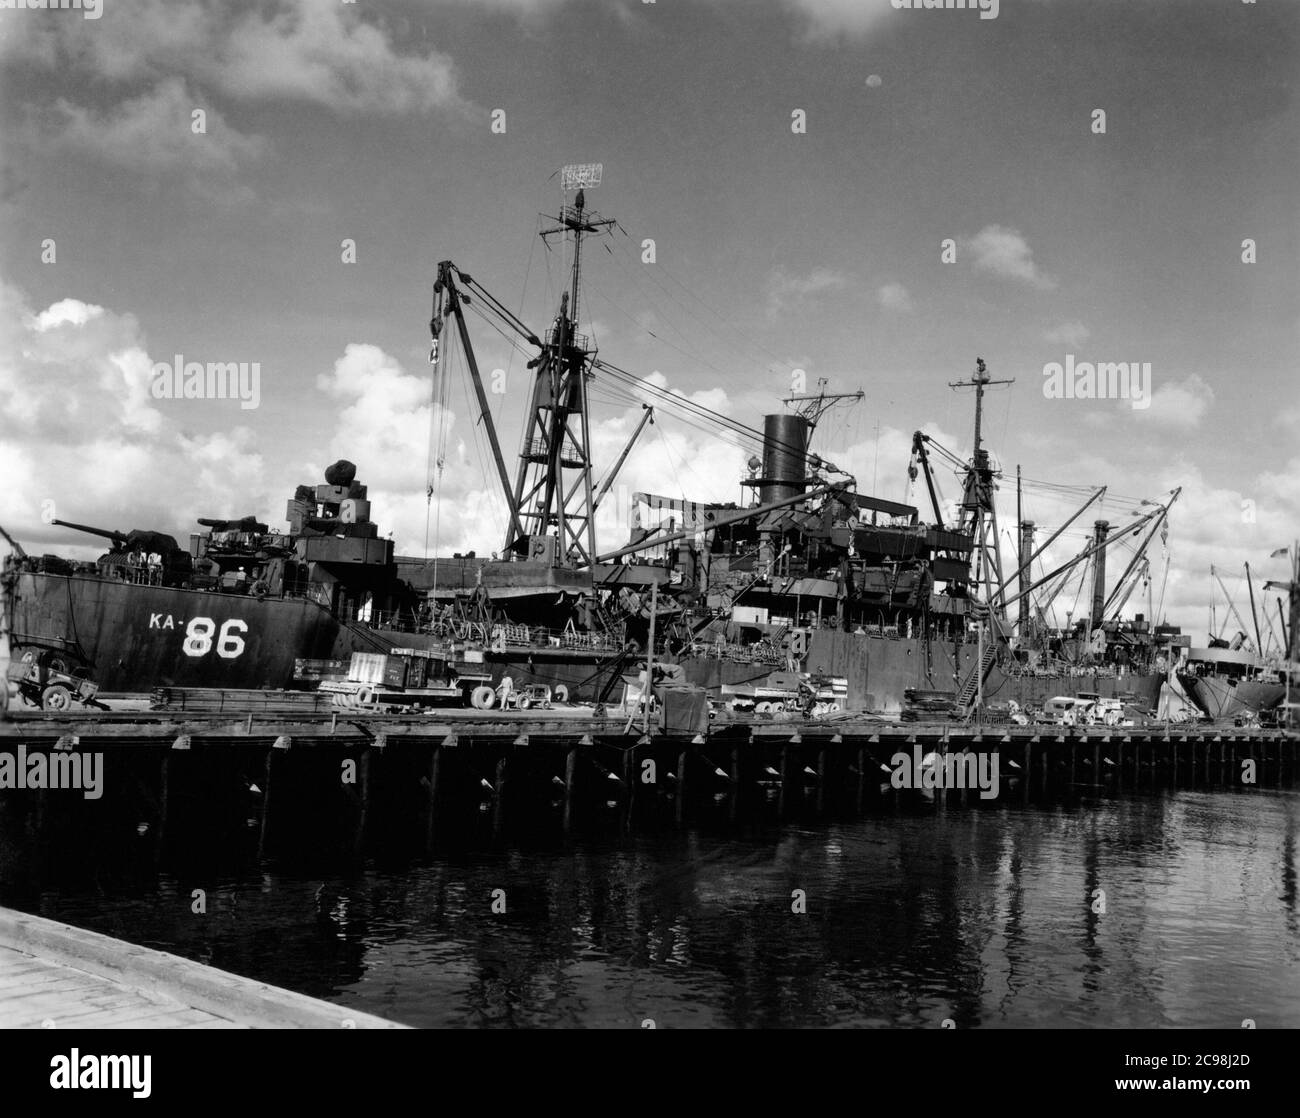 AKA-86 U.S.S. Woodford, unloading cargo at Apra Harbour, Guam, 1945. As the 75th anniversary of V-J Day approaches, The Consoli Collection has published four photo essays by U.S. Navy Lt. (j.g.) Joseph J. Consoli. The photos were taken between July and December 1945 in the Mariana Islands. They document U.S. Navy life before and after the Japanese surrender. Stock Photo